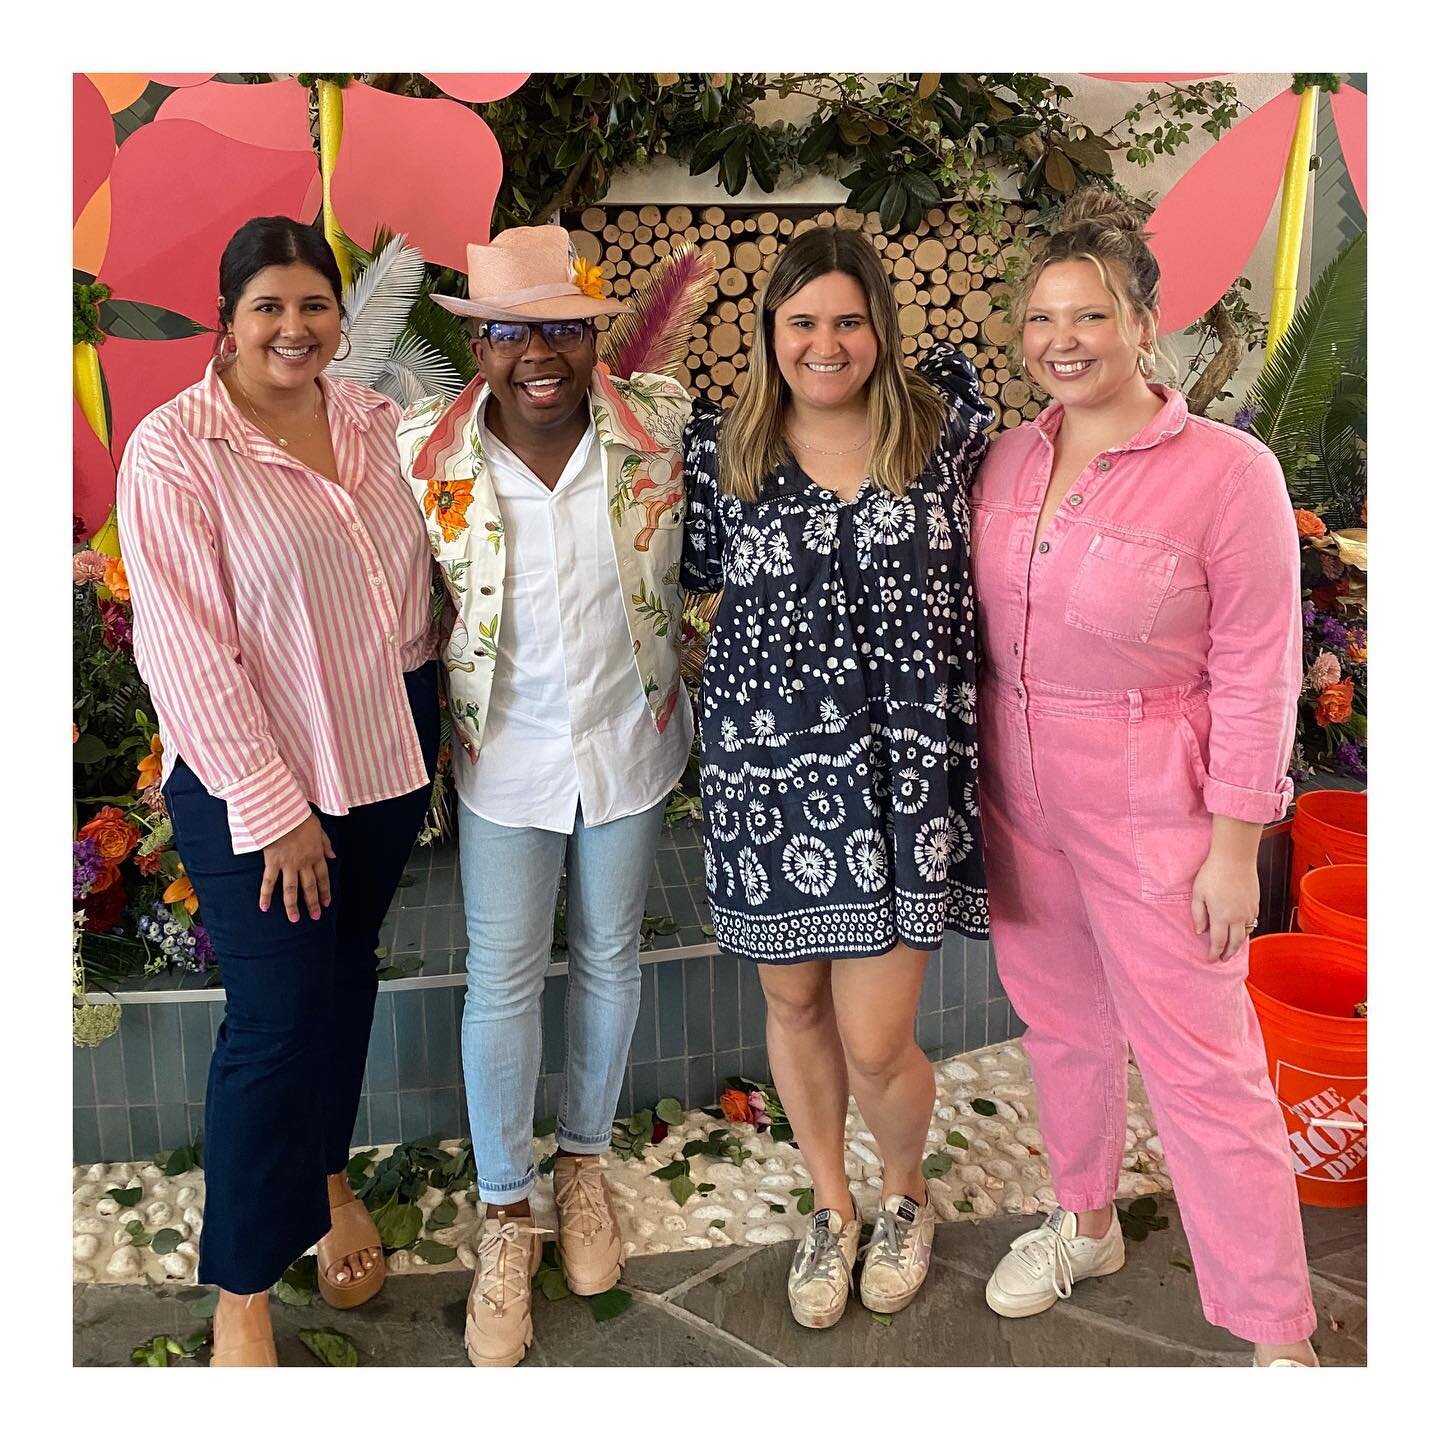 Our team was busy this weekend celebrating the Bodacious Blooms Flower Festival at @buckheadvillagedistrict and @shopsaroundlenox! From a Thursday night kick-off cocktail party and a floral arrangement class with @canaanmarshall to a property wide st